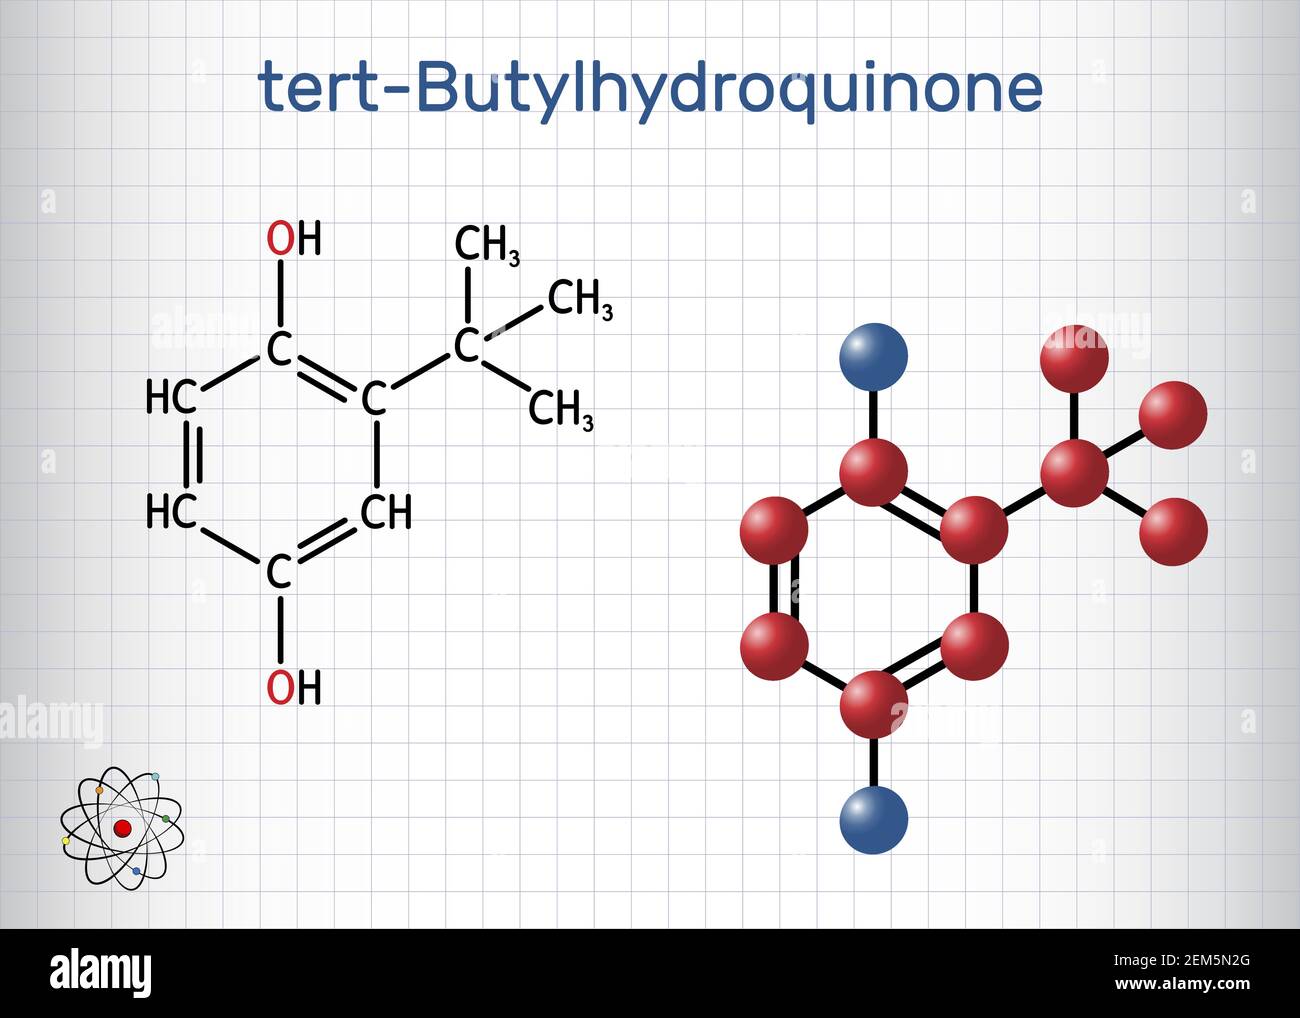 TBHQ, tert-Butylhydroquinone, tertiary butylhydroquinone molecule. It is antioxidant, food additive E319, derivative of hydroquinone. Sheet of paper i Stock Vector